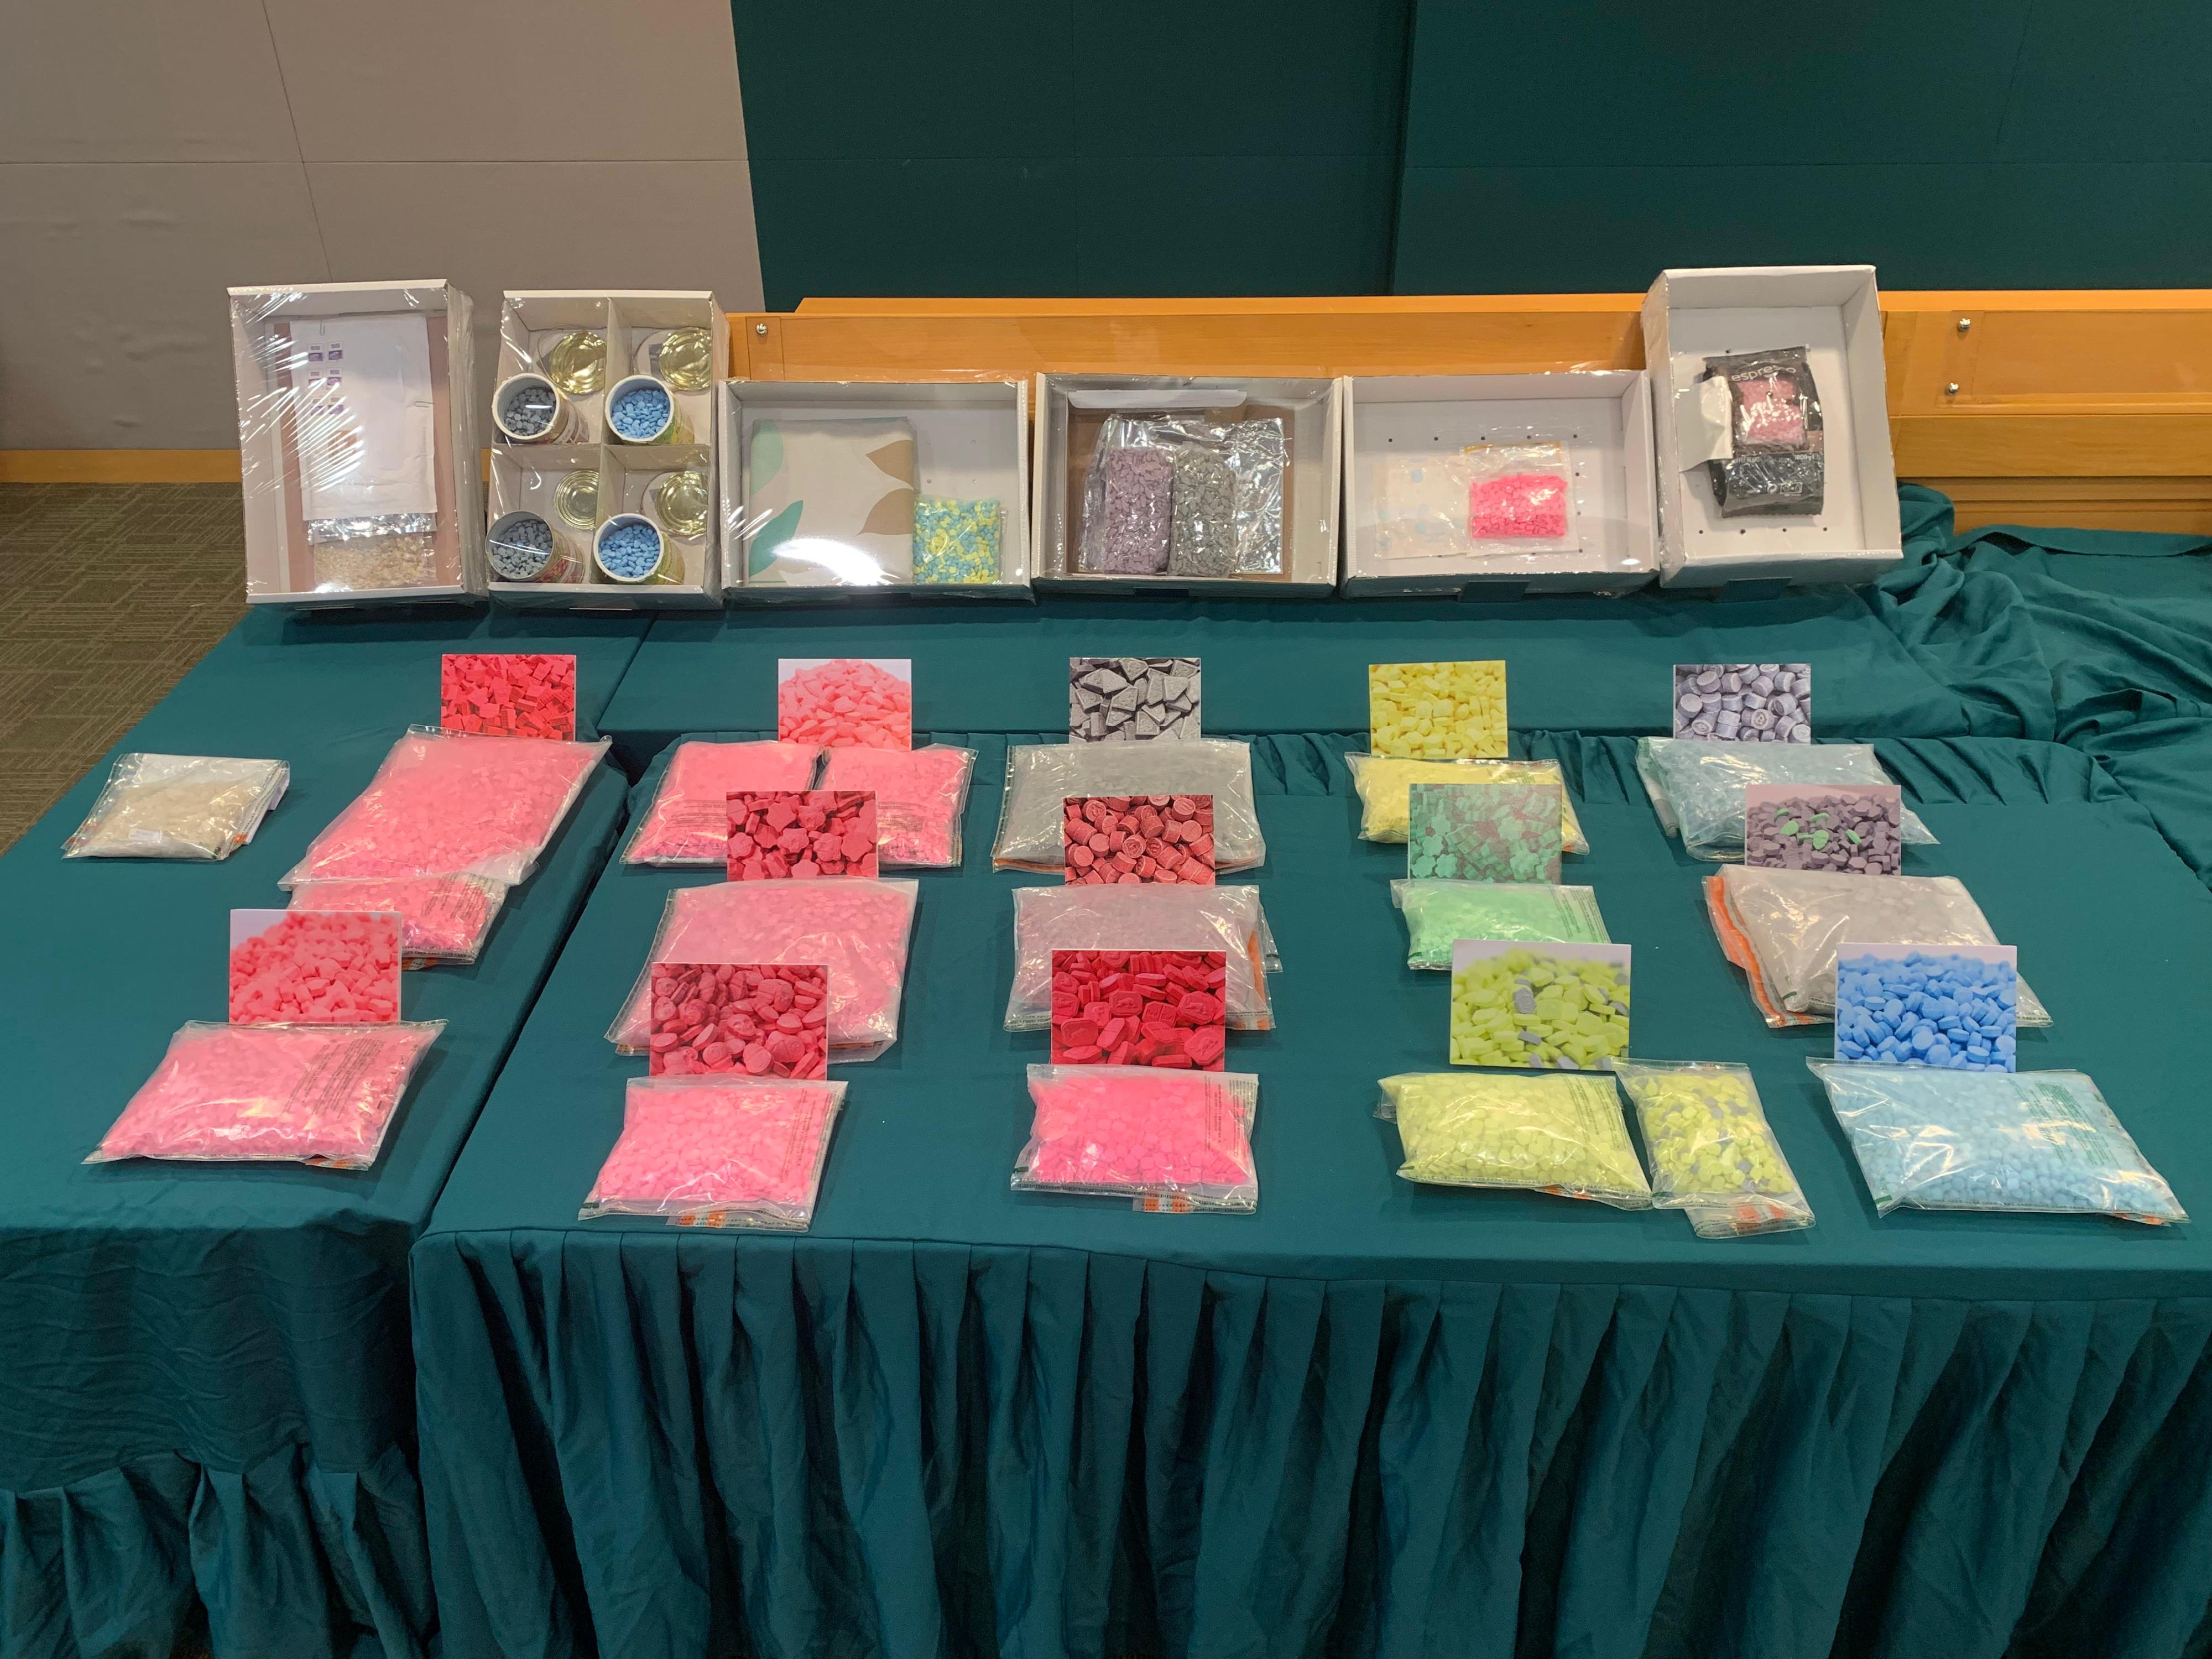 In the light of local demand for drugs during the long holidays, Hong Kong Customs mounted a special operation from November 1 to today (December 10) to combat party drug trafficking activities. Different kinds of party drugs with a total estimated value about $36 million were seized, including about 52 000 tablets of suspected ecstasy and about 153 kilograms of suspected cannabis buds. Photo shows some of the suspected ecstasy seized and the concealment methods.